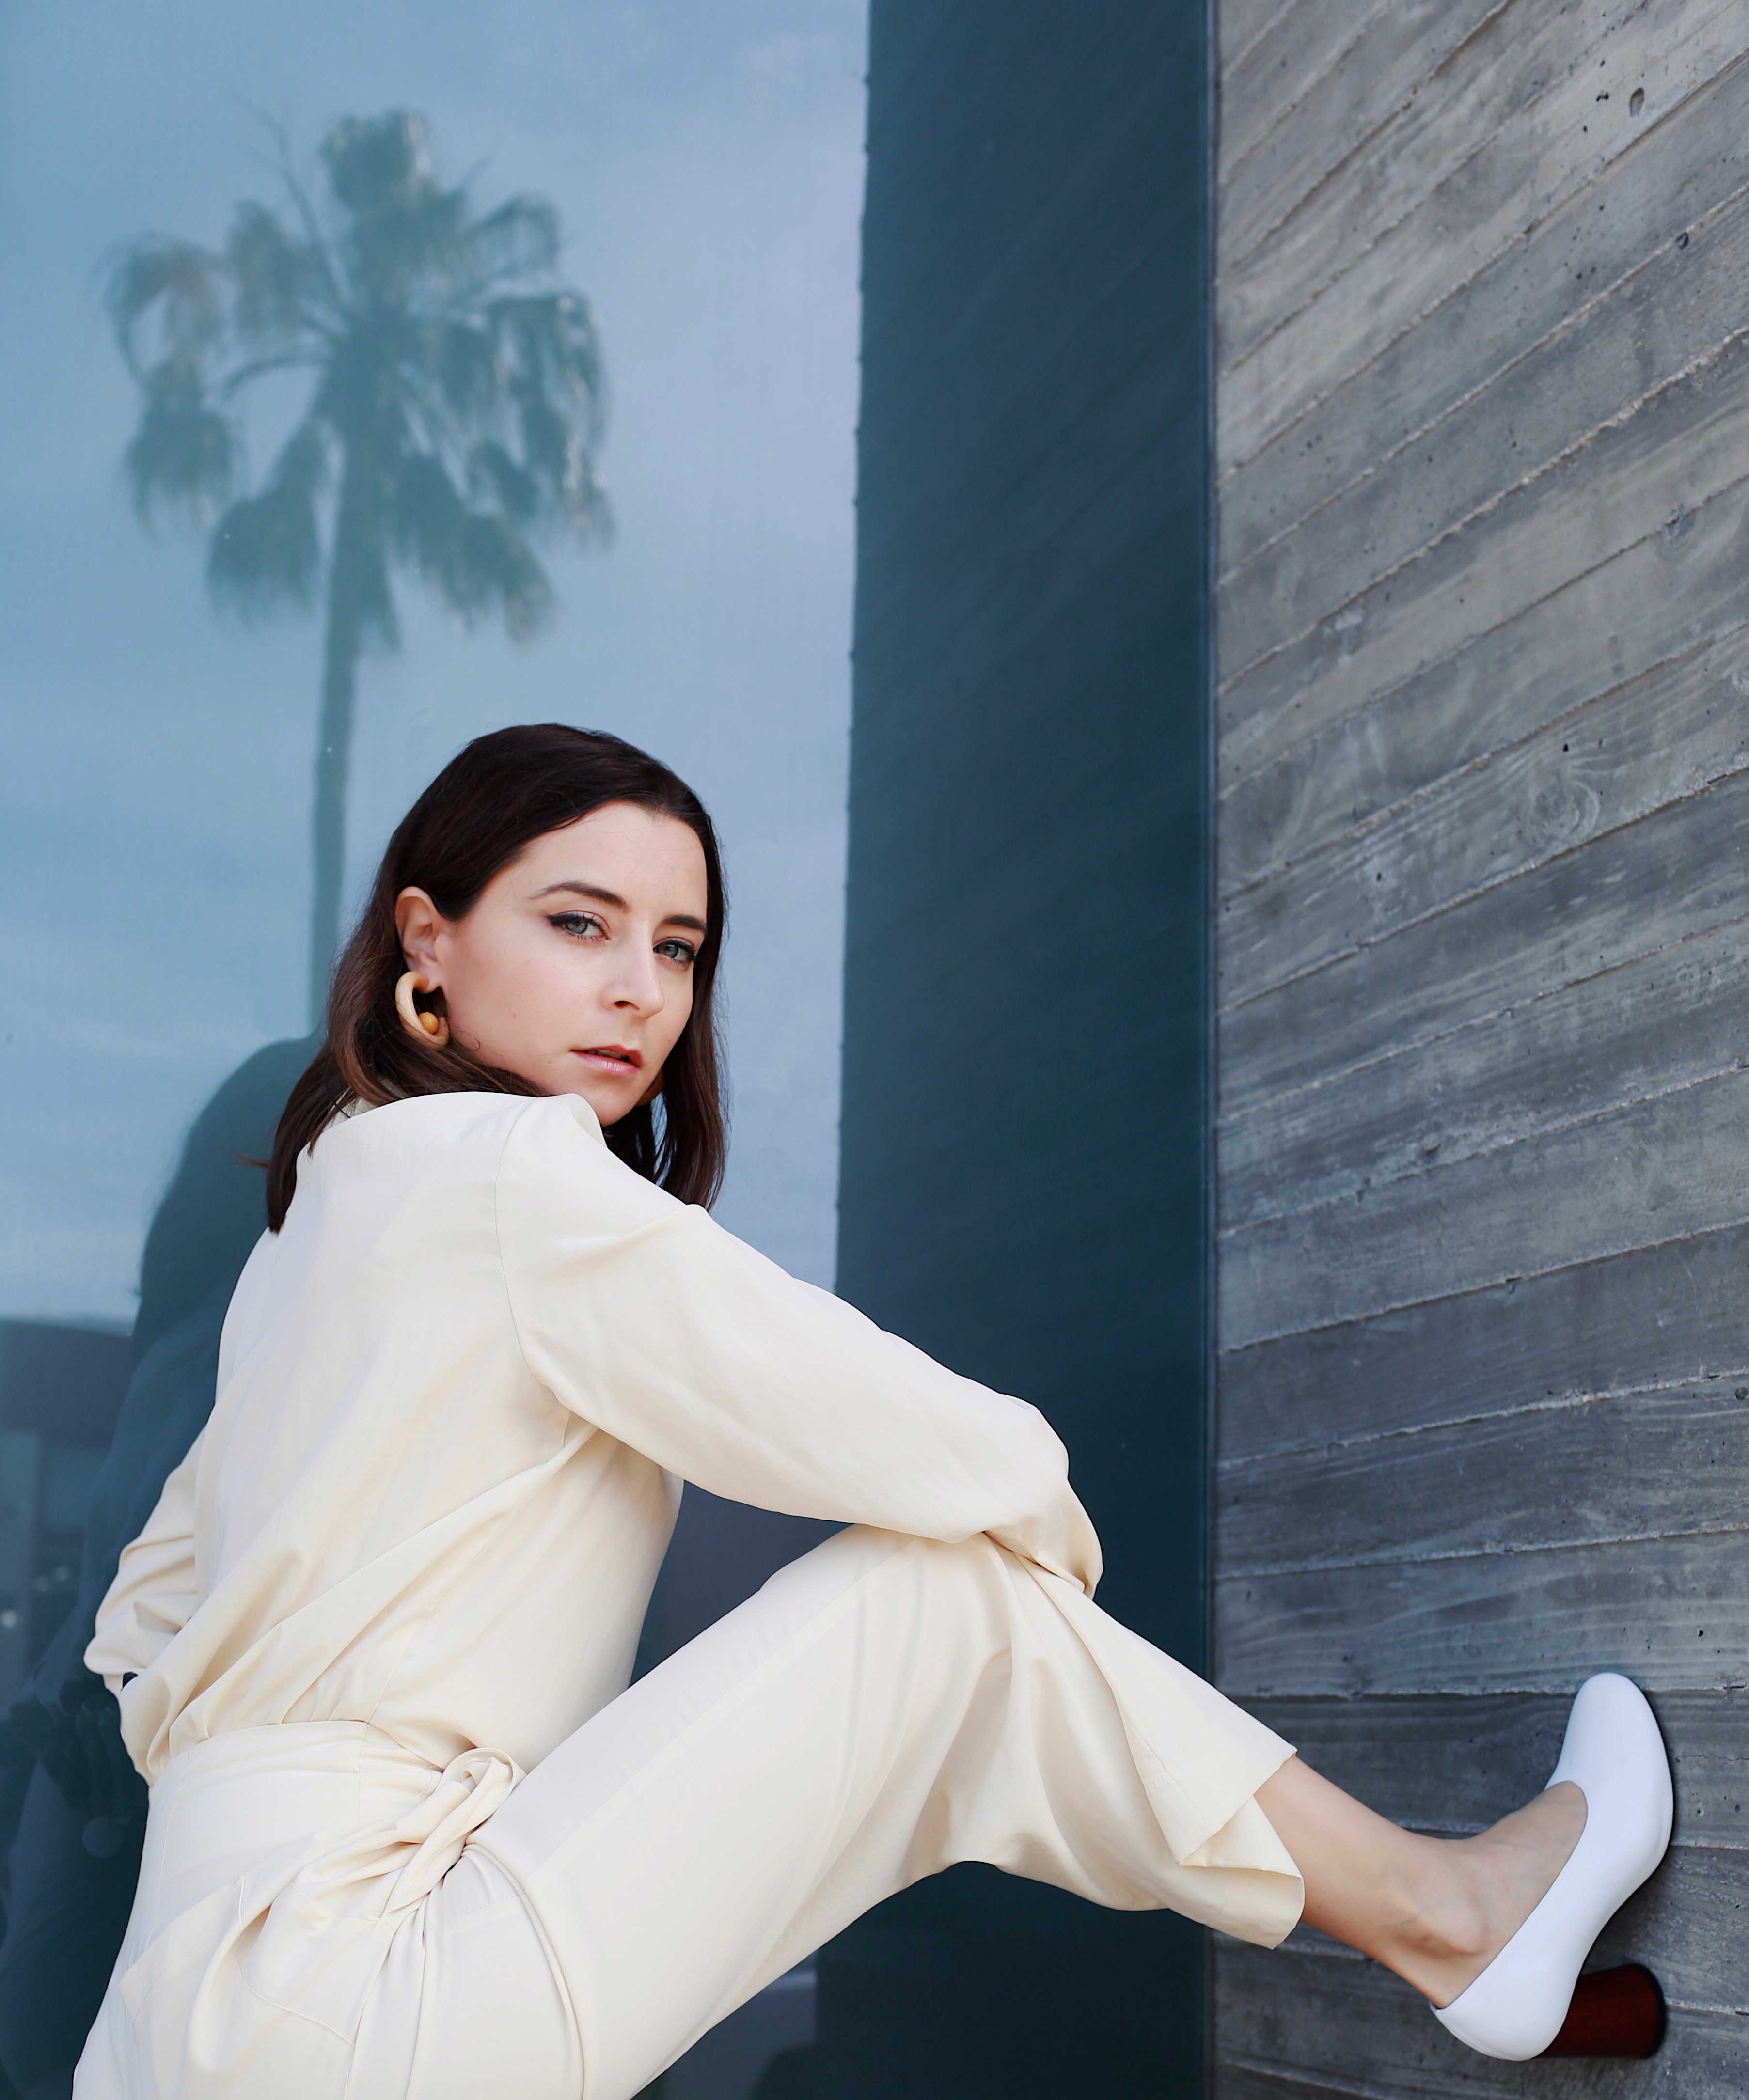 How to wear the white suit for women. White party outfit ideas and summer outfit ideas are on Modersvp.com. White suit from Ba&Sh Paris worn by Julia Comil vanilla jumpsuit via Nanushka